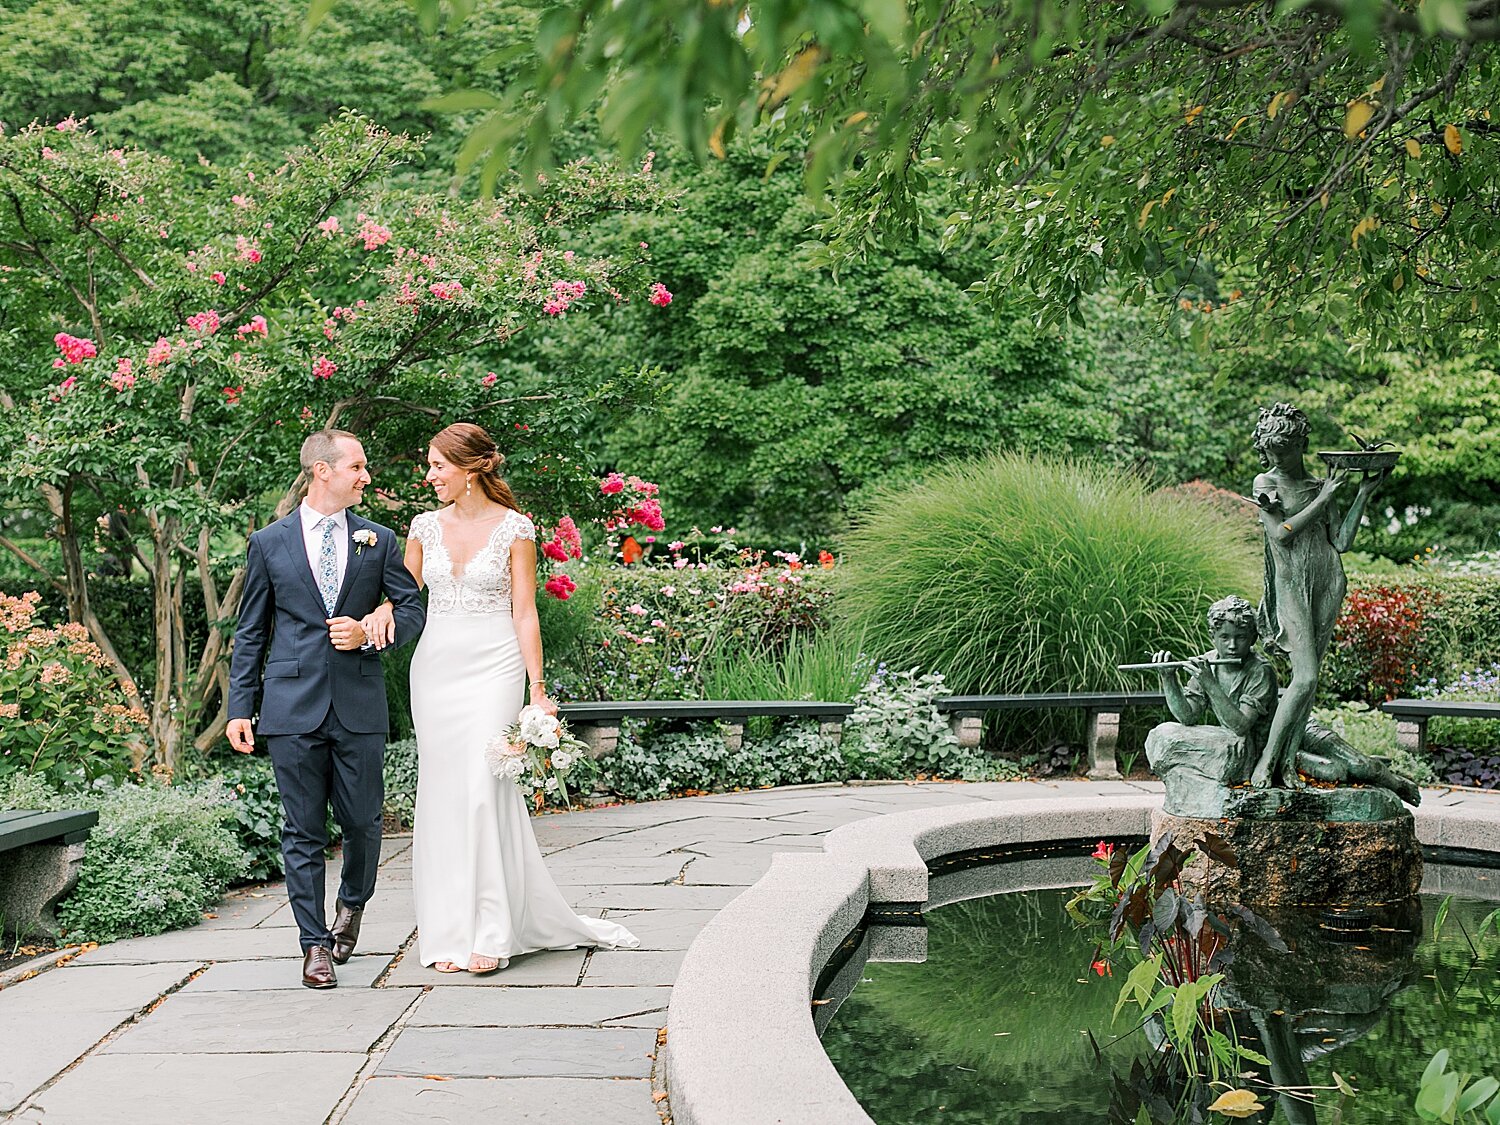 newlyweds stroll through Central Park gardens | Asher Gardner Photography | Elopement at the Central Park Conservatory Gardens